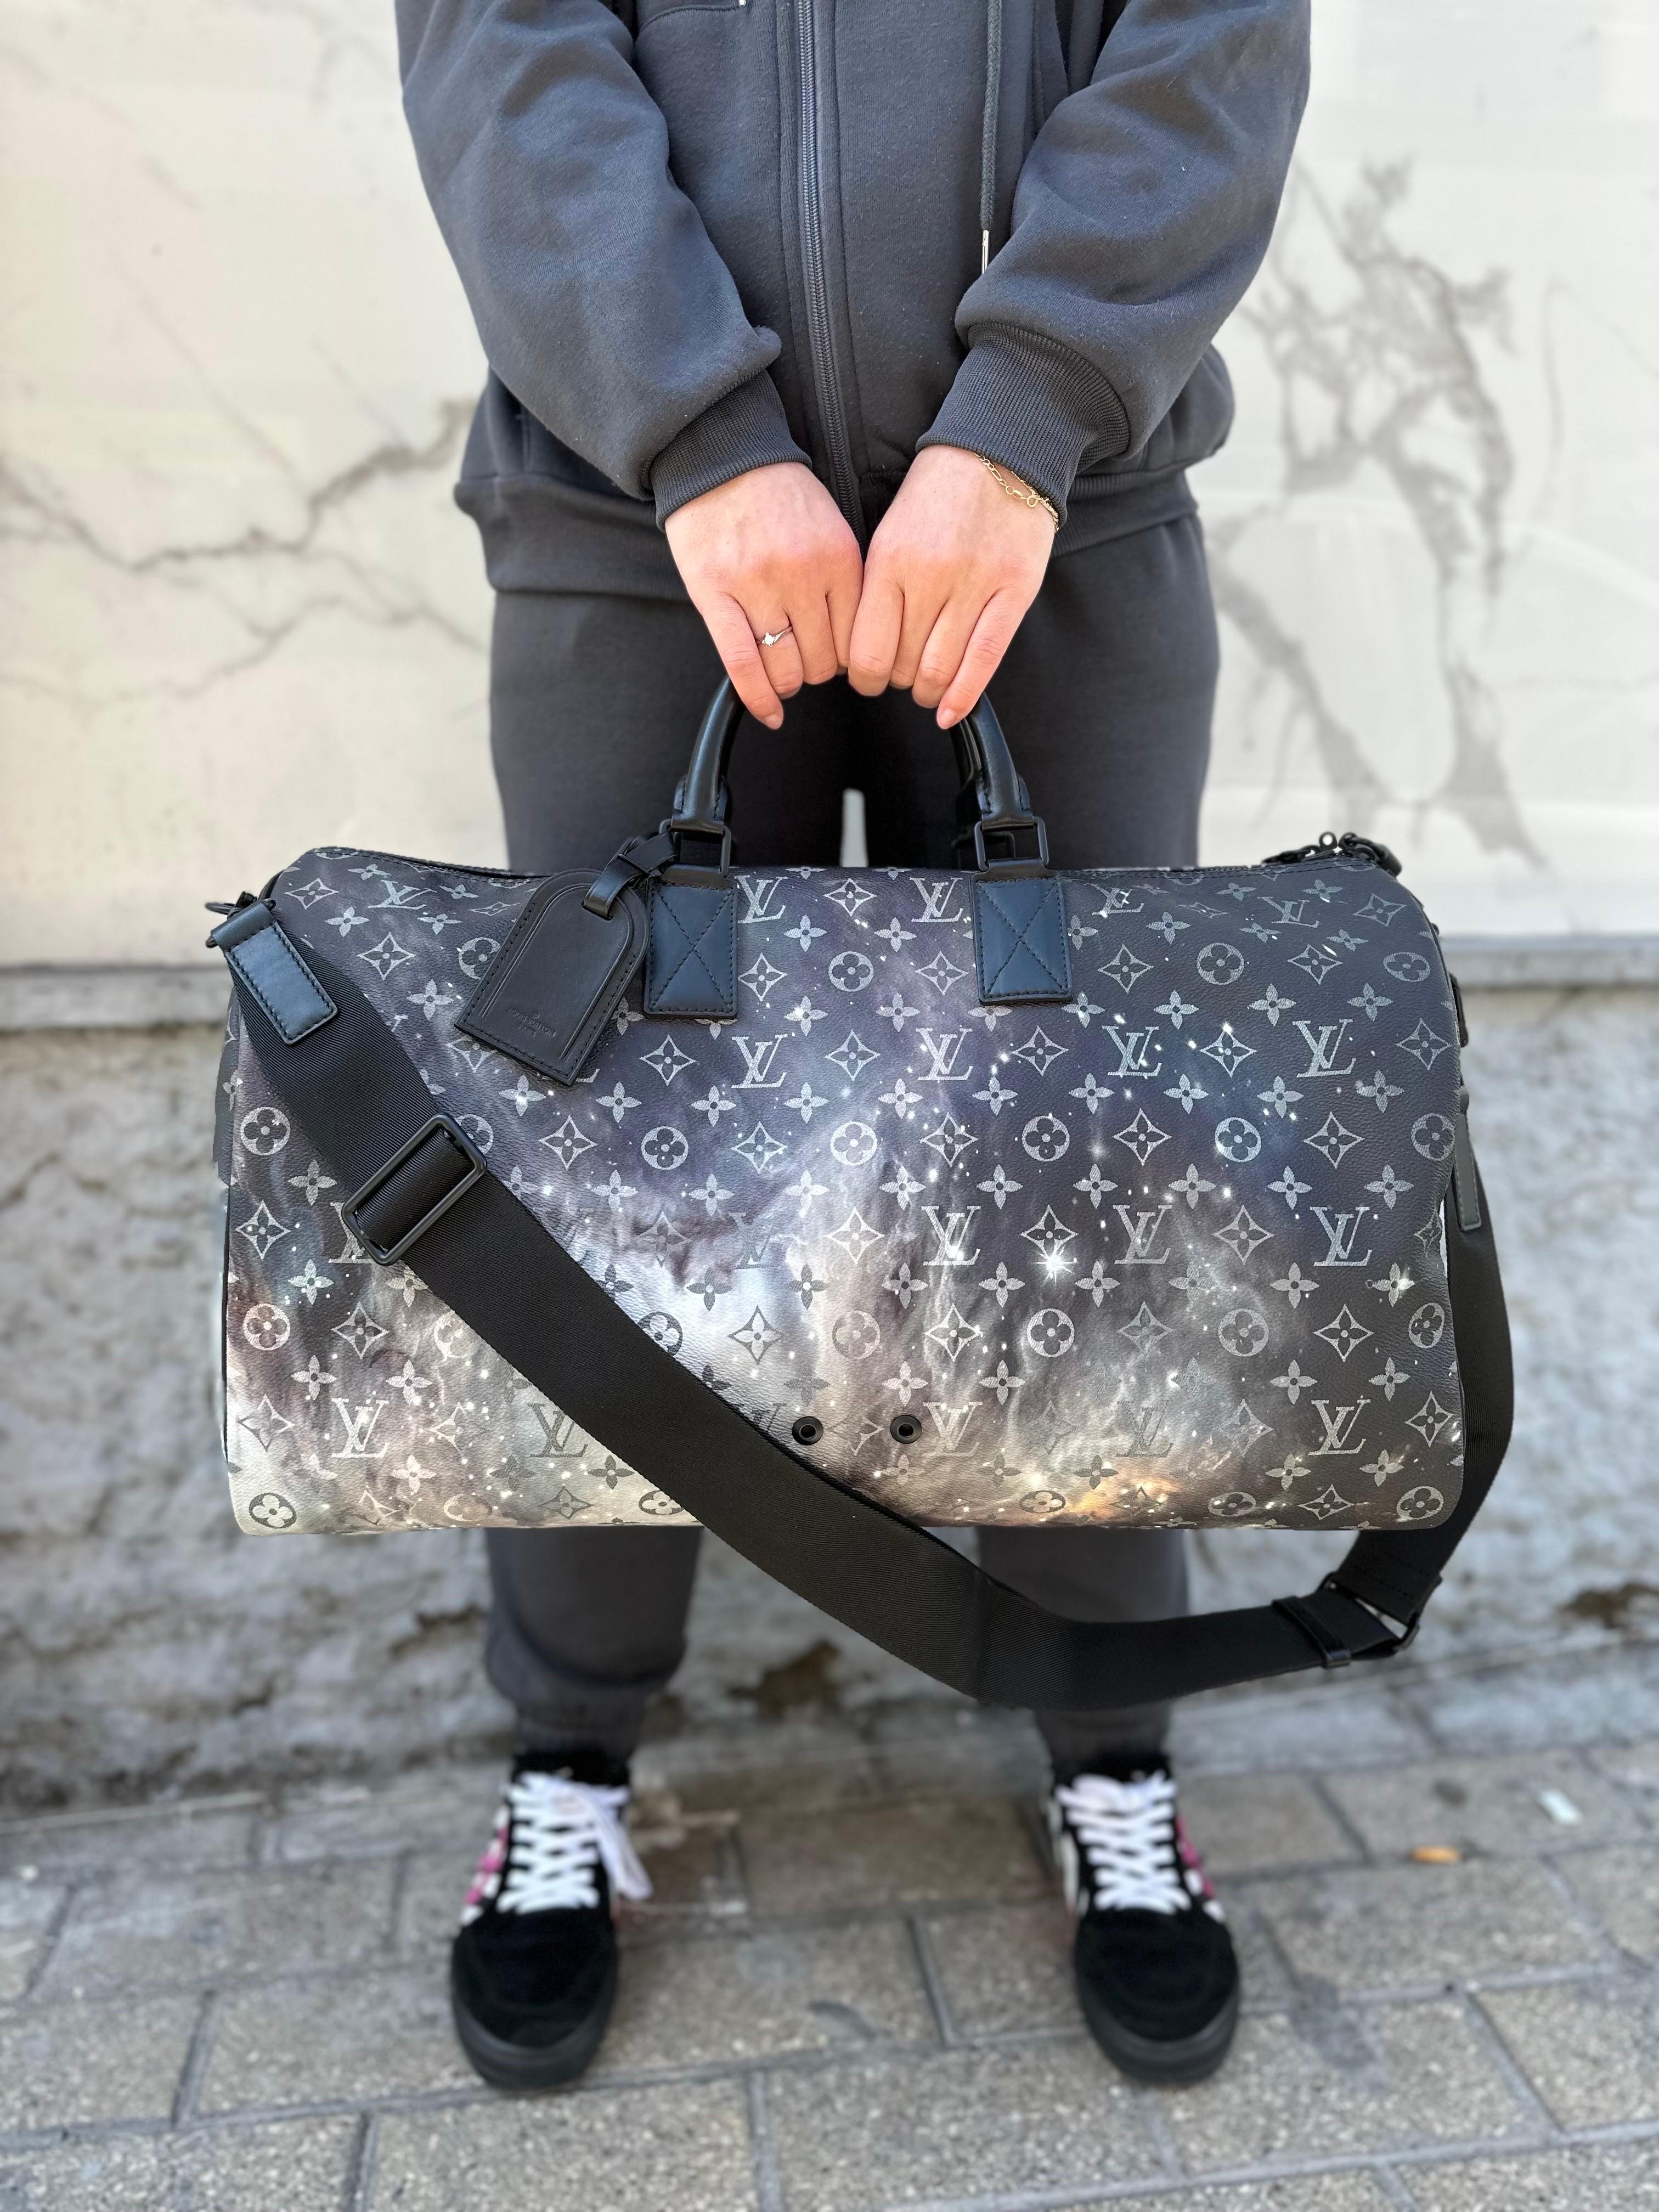 Louis Vuitton Galaxy Keepall Bandouliere 50 Limited Edition Travel Bag For Sale 13